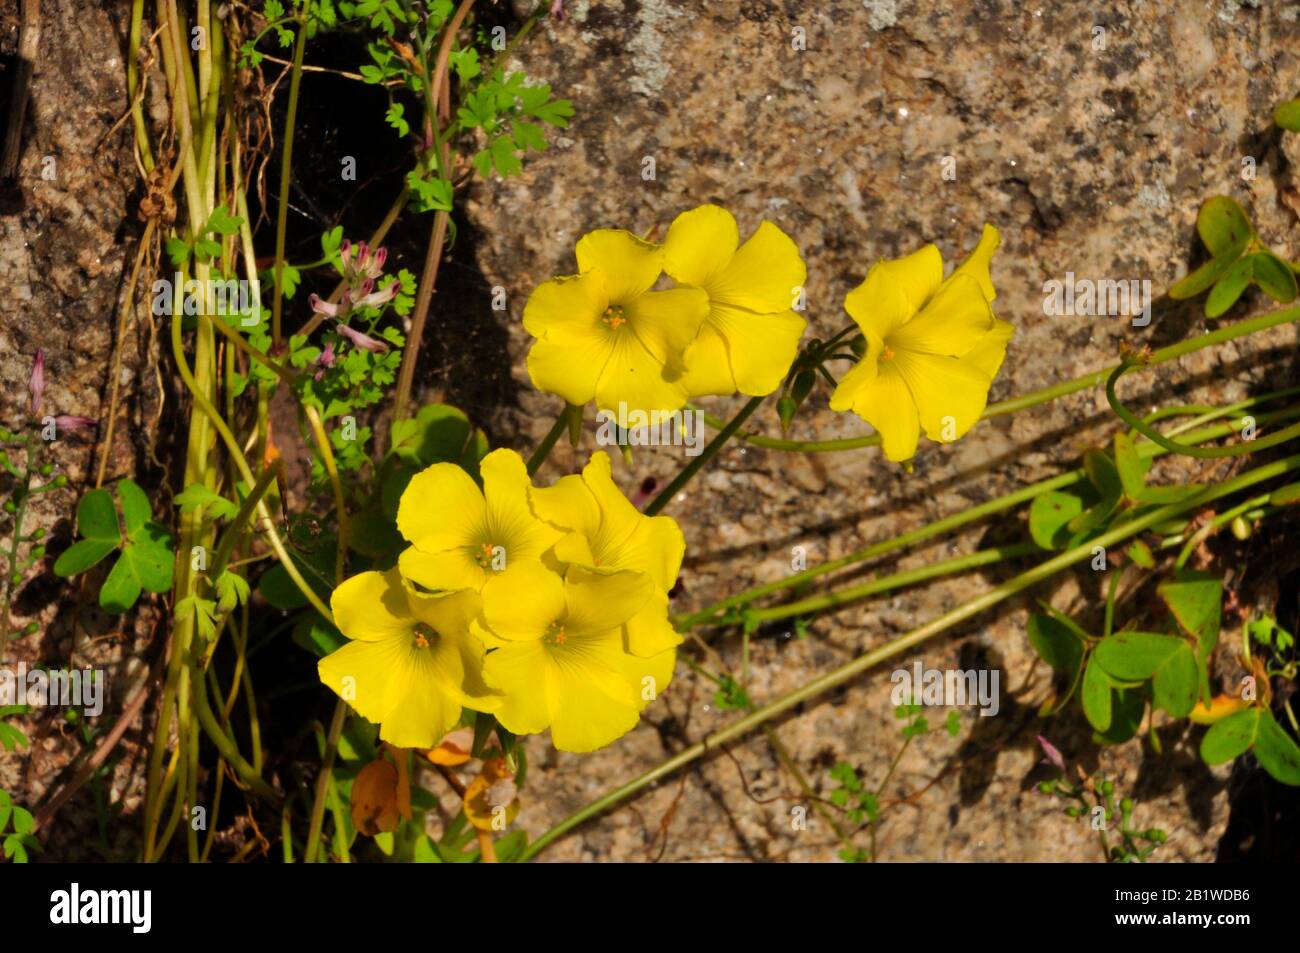 Bermuda Buttercup,Oxalis pes-caprae,bright yellow flower native of South Africa,invasive weed grows wild on the Isles of Scilly,Cornwall. UK. Stock Photo